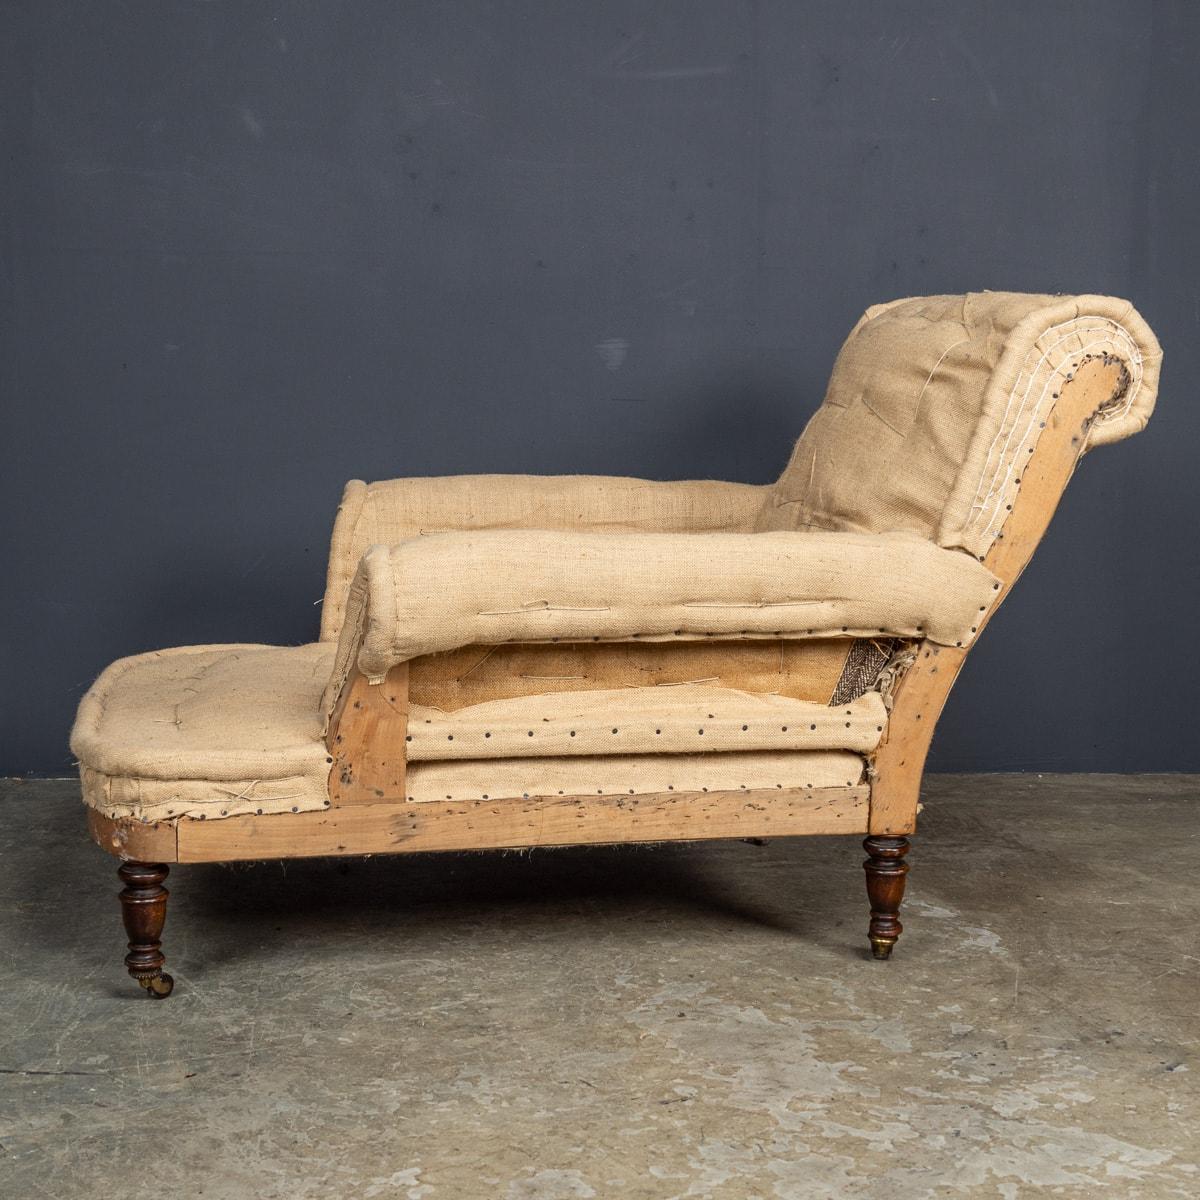 Antique 19th Century Victorian Chaise Longue c.1870 In Good Condition For Sale In Royal Tunbridge Wells, Kent